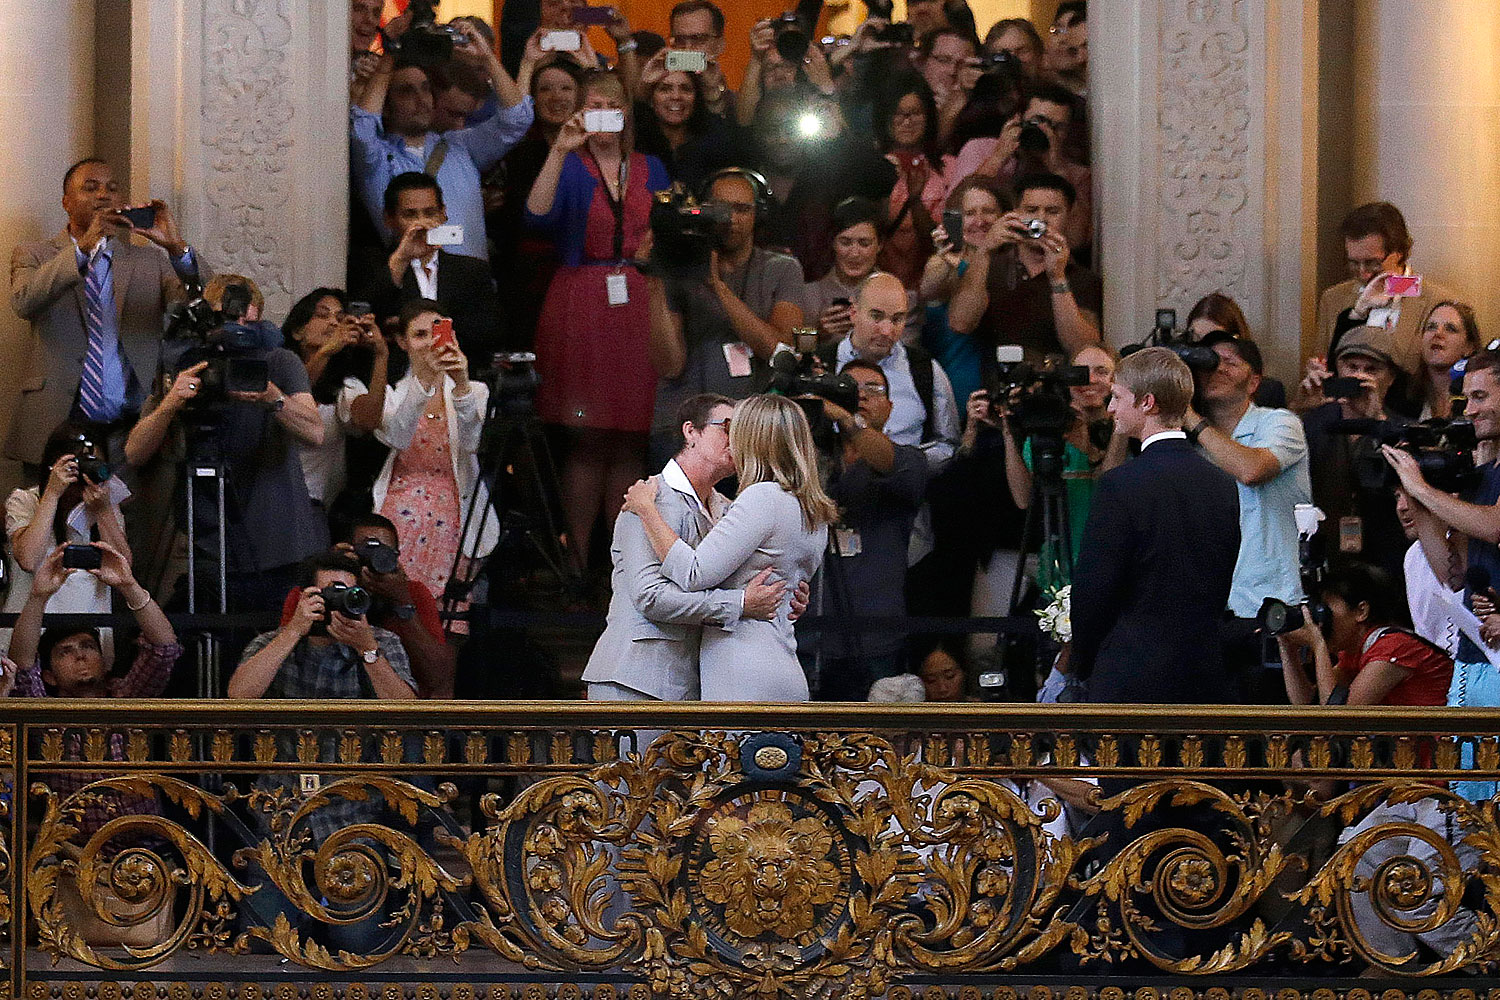 Kris Perry, foreground left, kisses Sandy Stier as they are married at City Hall in San Francisco.